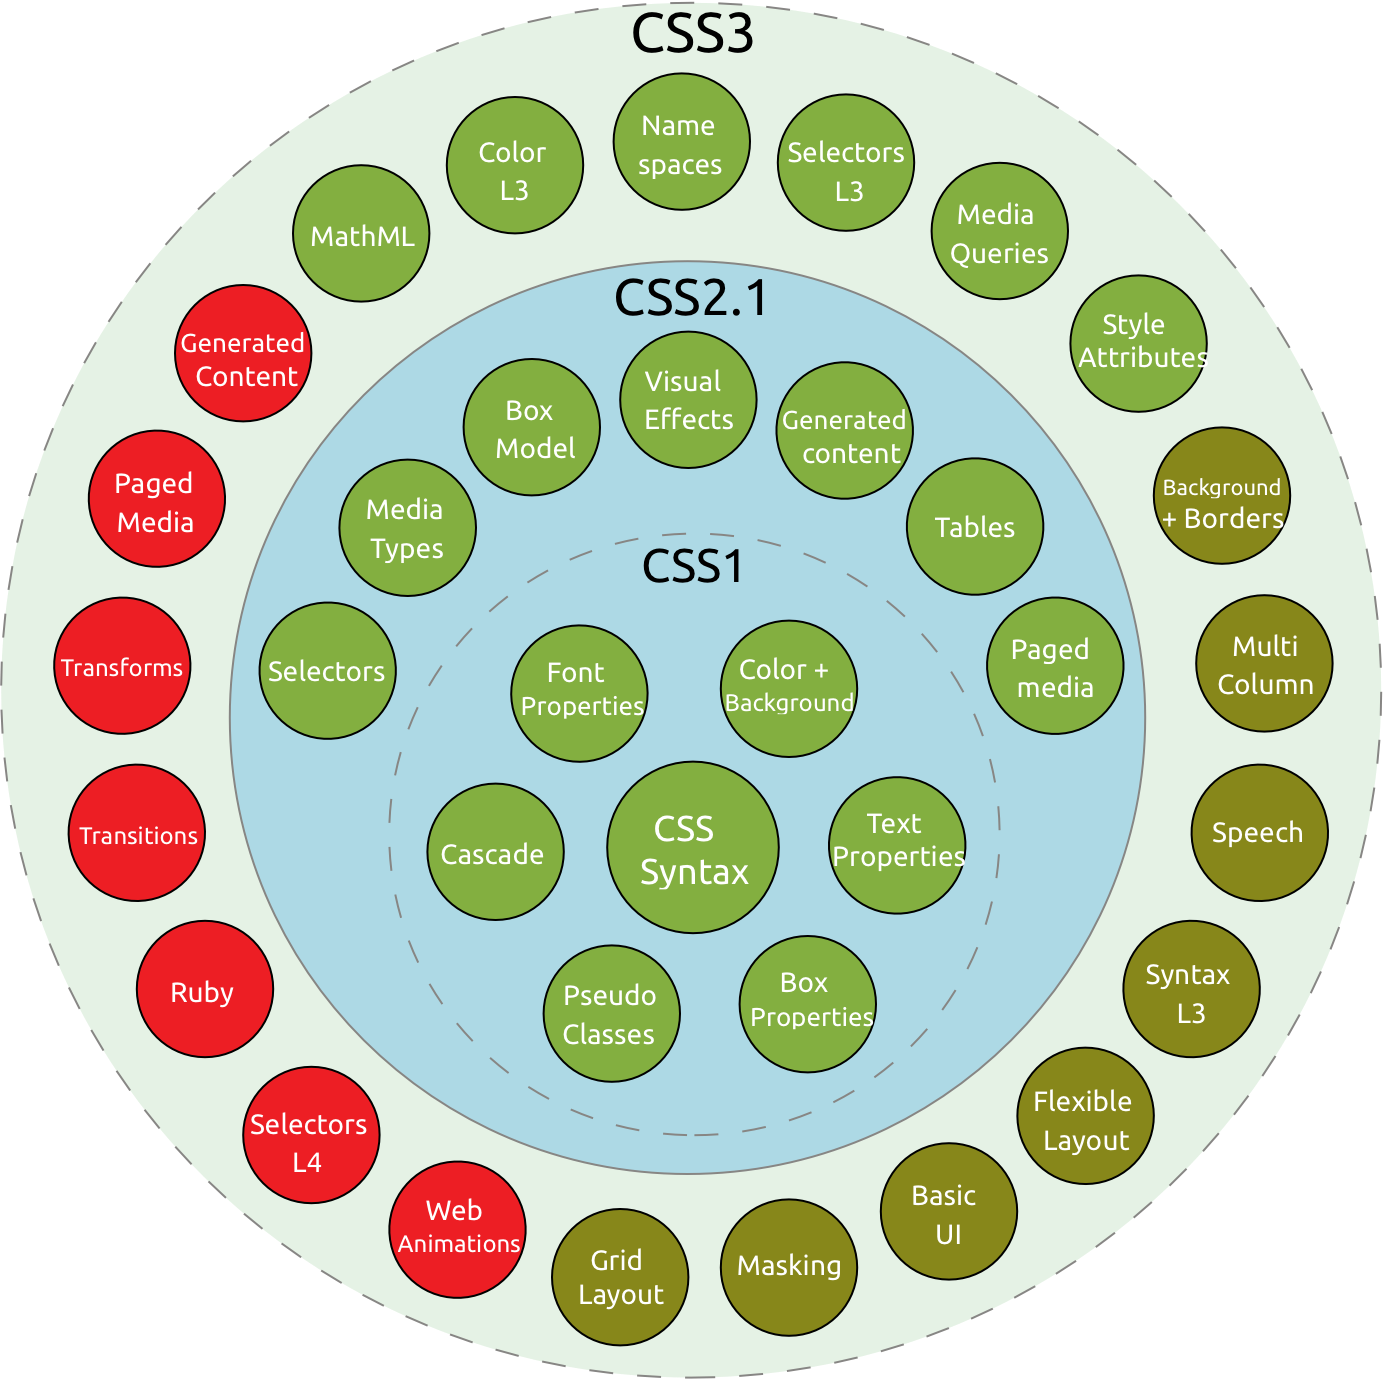 CSS3_taxonomy_and_status-v2.png